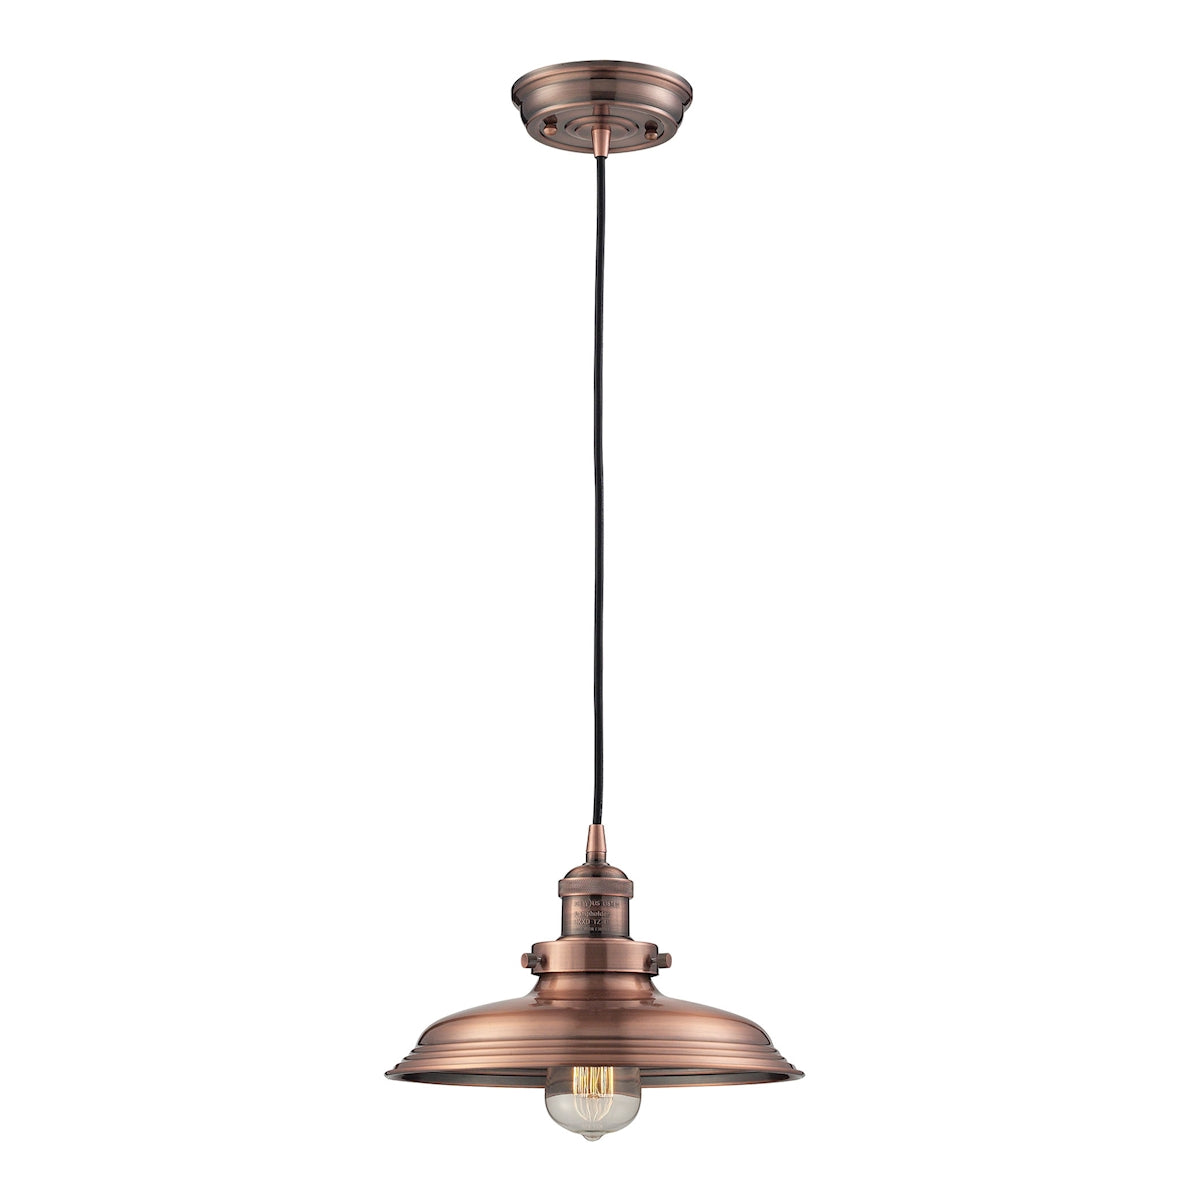 ELK Lighting 55031/1 - Newberry 11" Wide 1-Light Mini Pendant in Antique Copper with Matching Shade